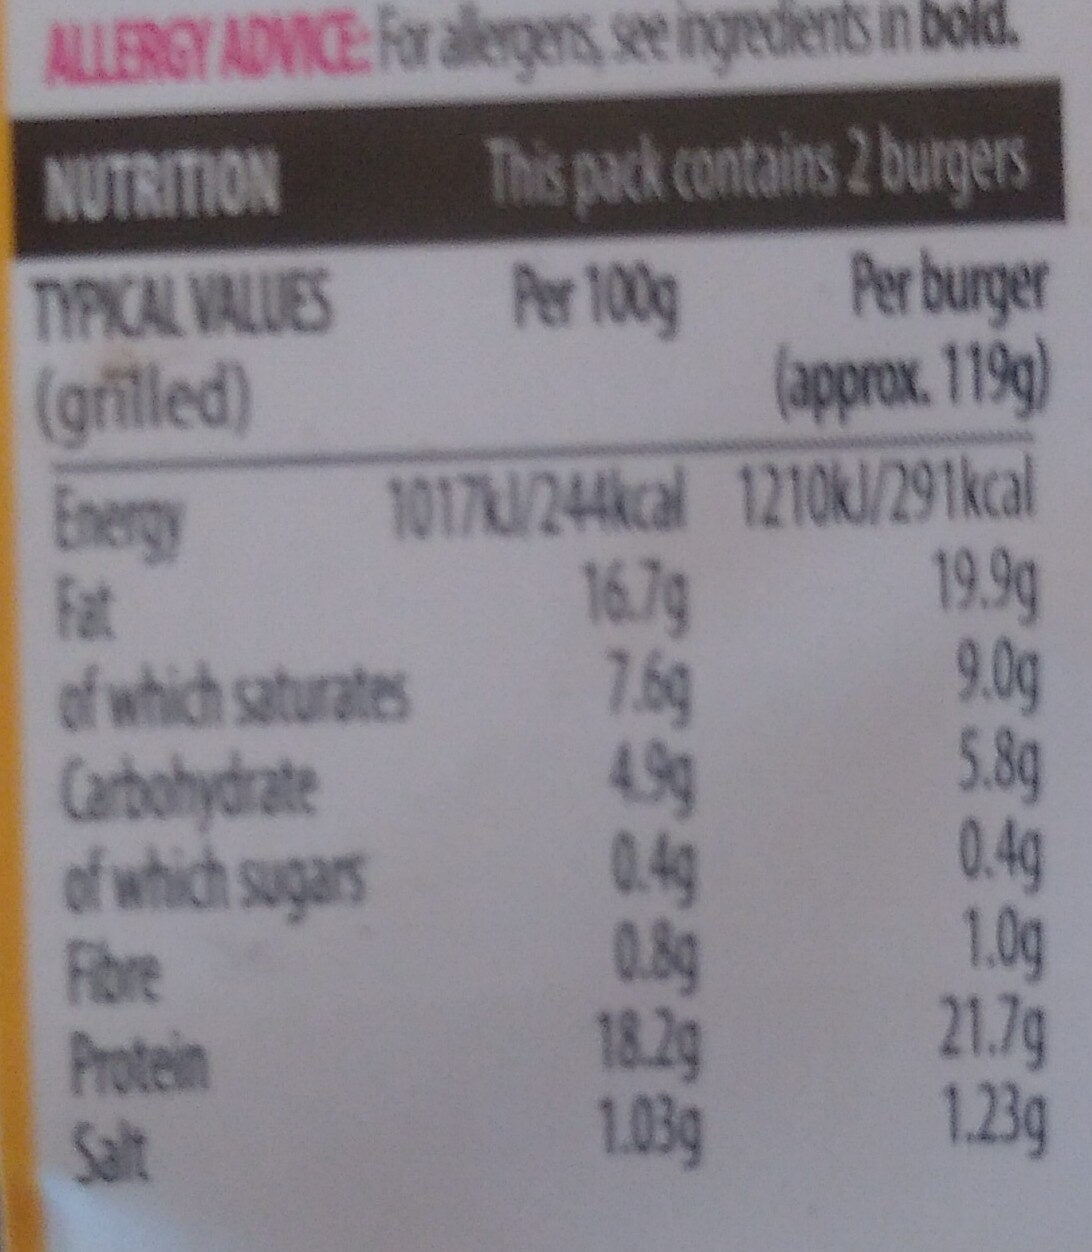 Mighty Yeast Extract & Roasted Onion Beef Burger - Nutrition facts